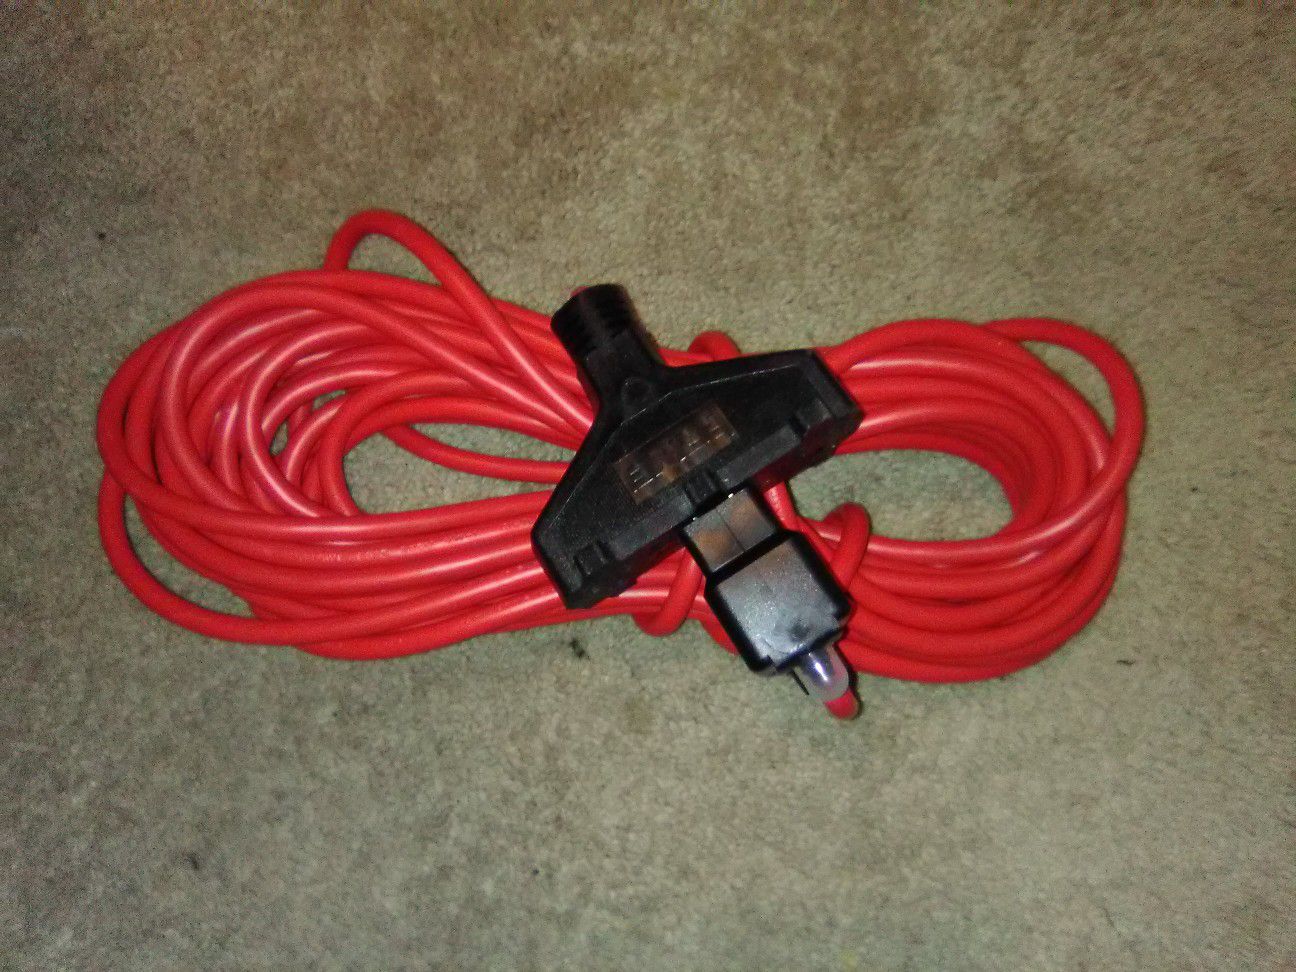 50' Extension Cord w/ 3 Way